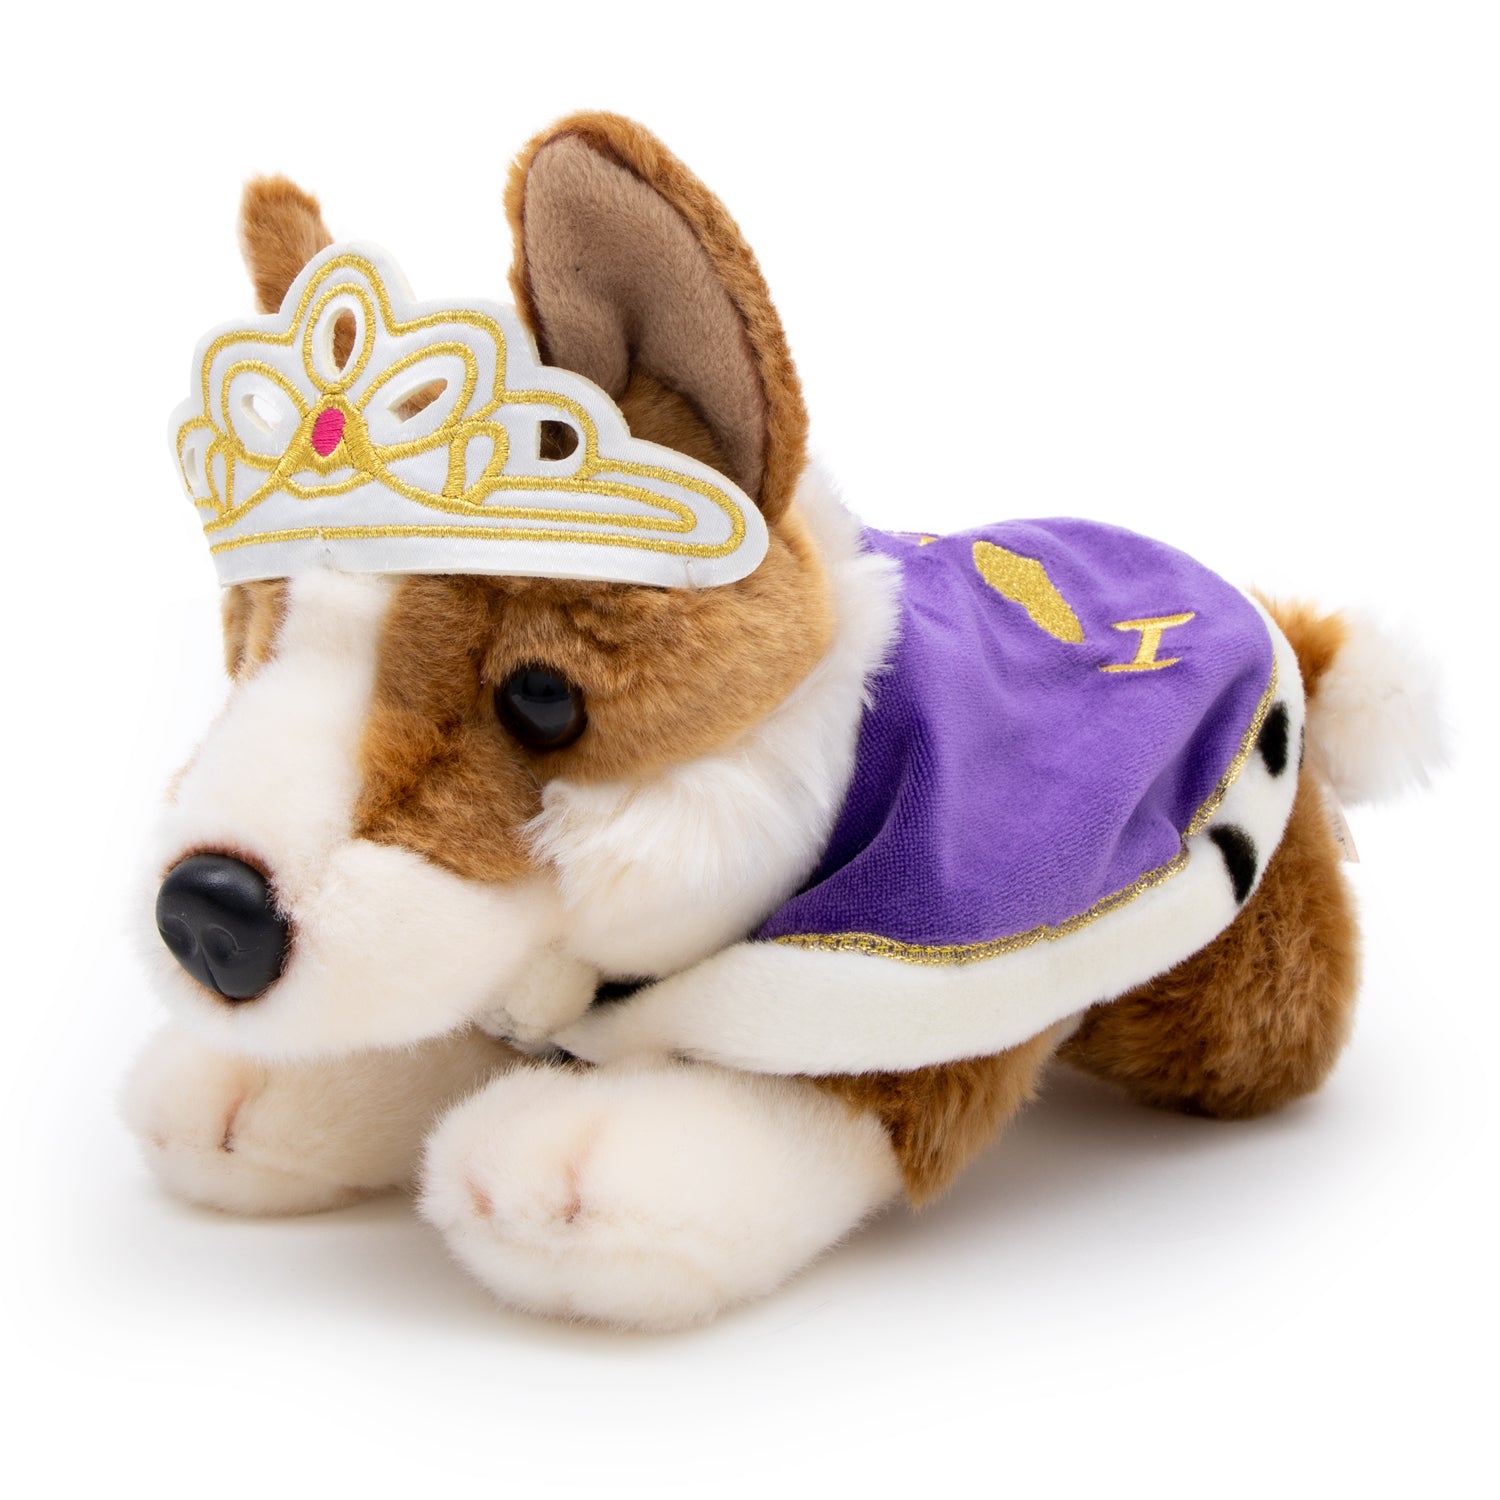 Royal Corgi Dog Soft Toy with Cape and Crown 1